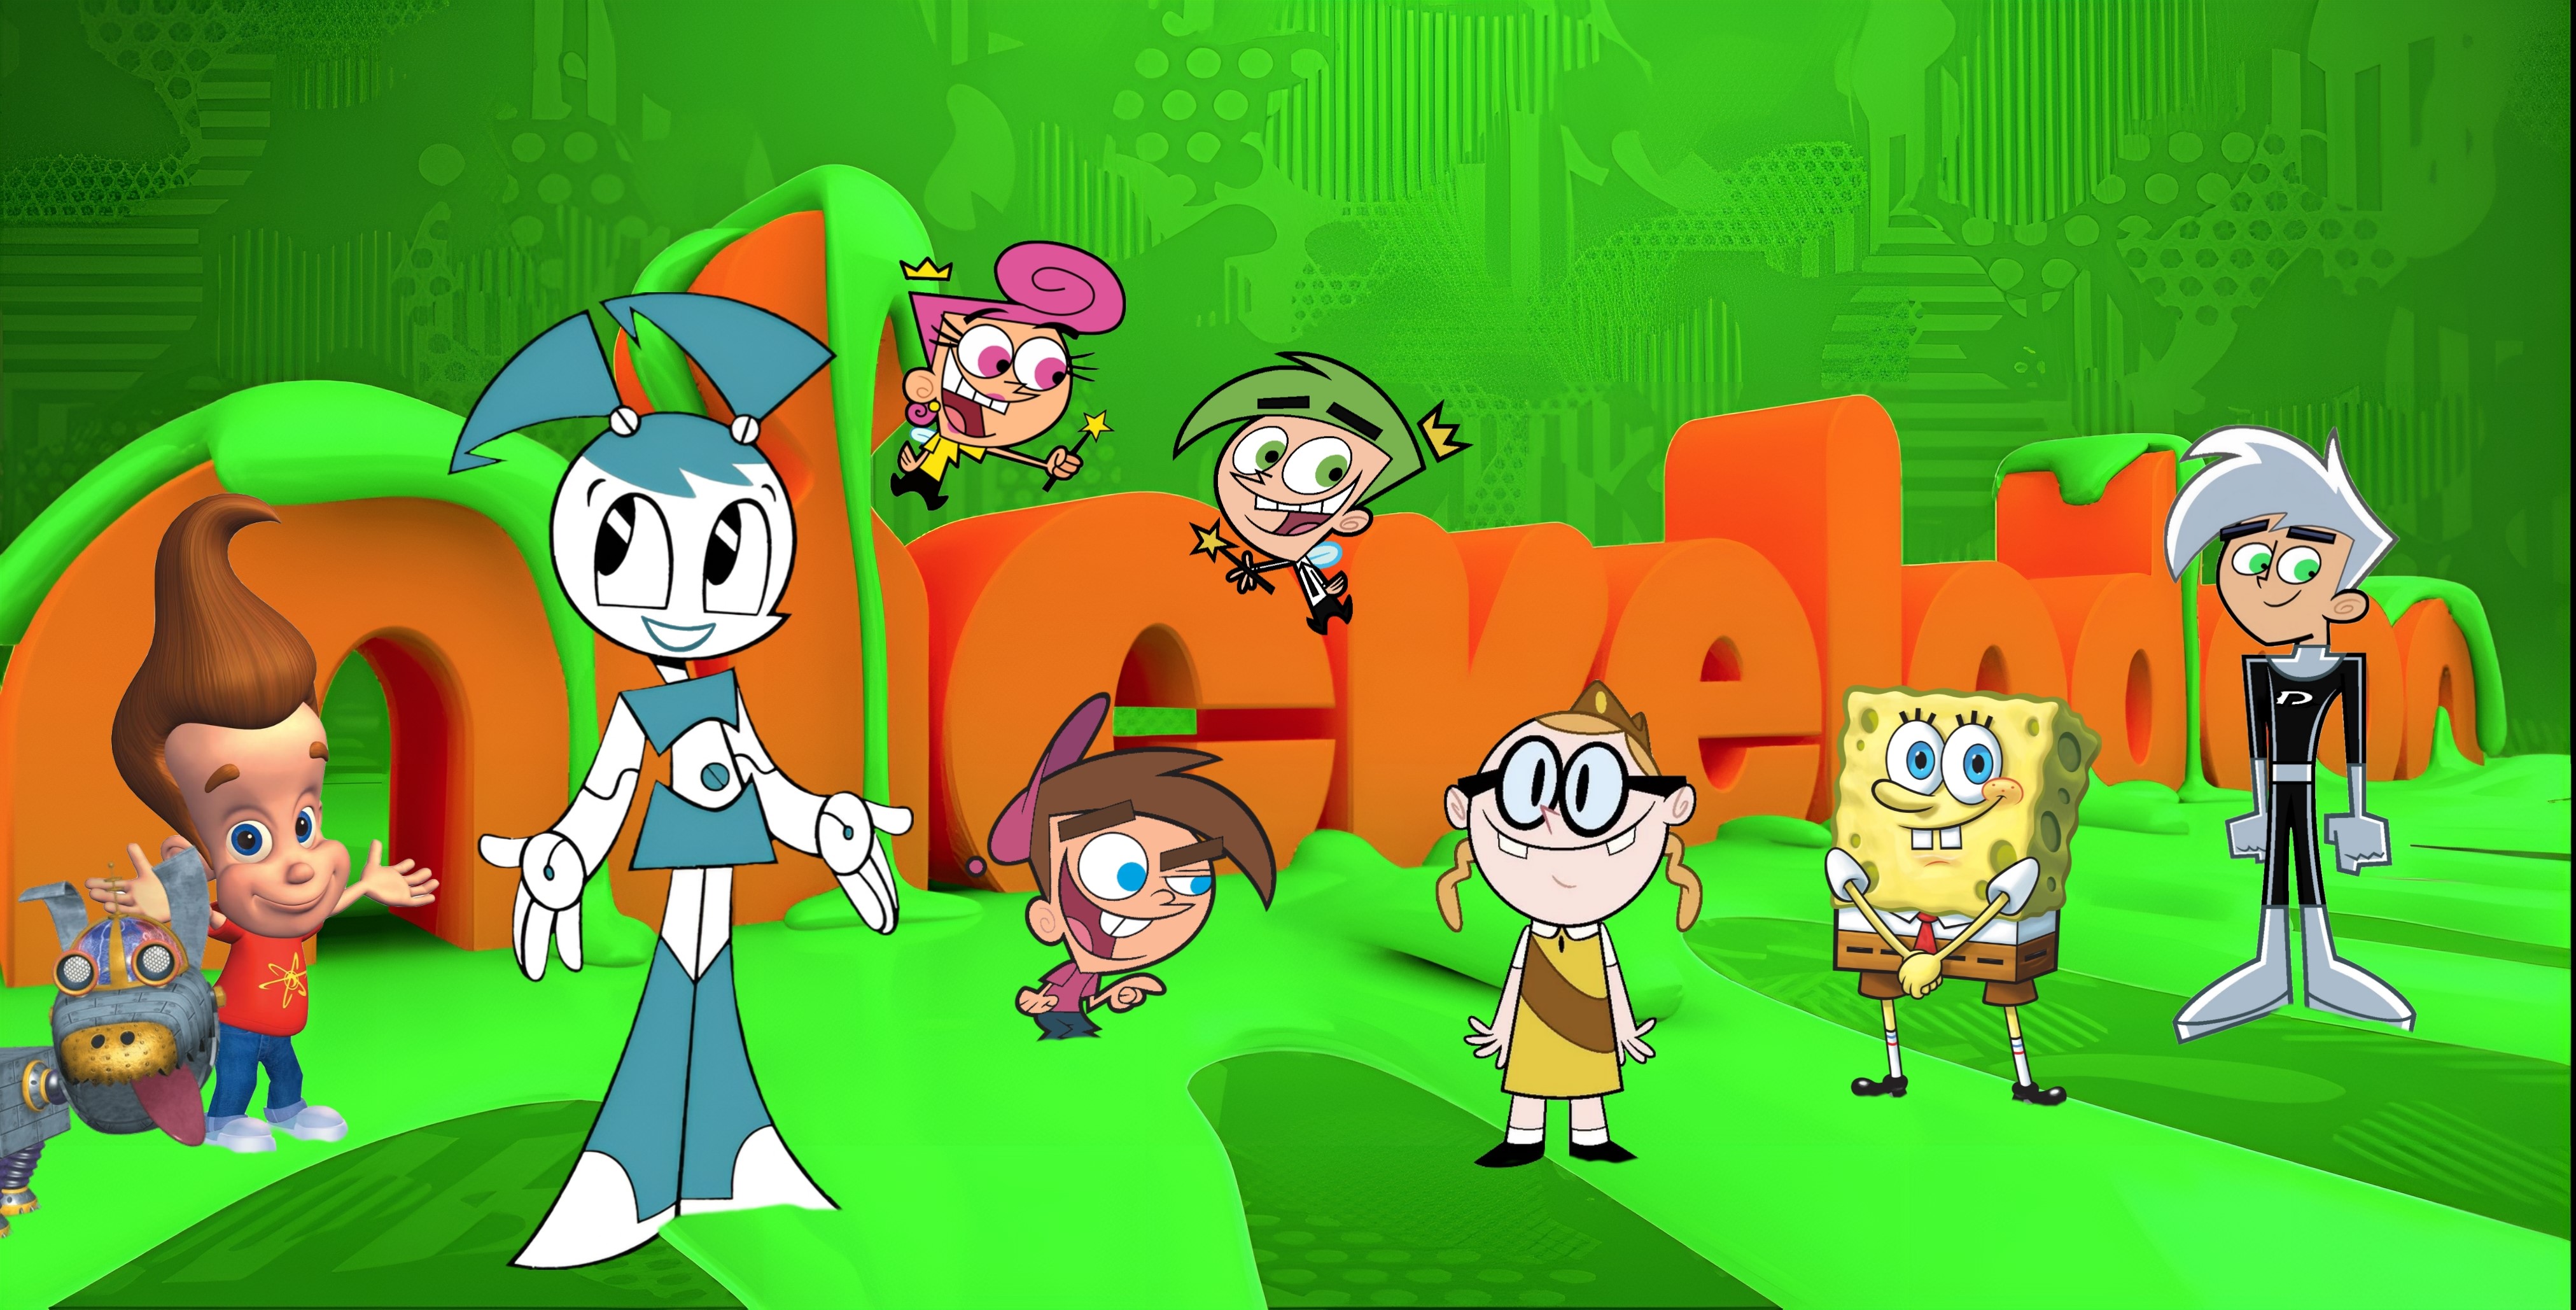 Kidscreen » Archive » Nickelodeon goes green with Slime City pop-up